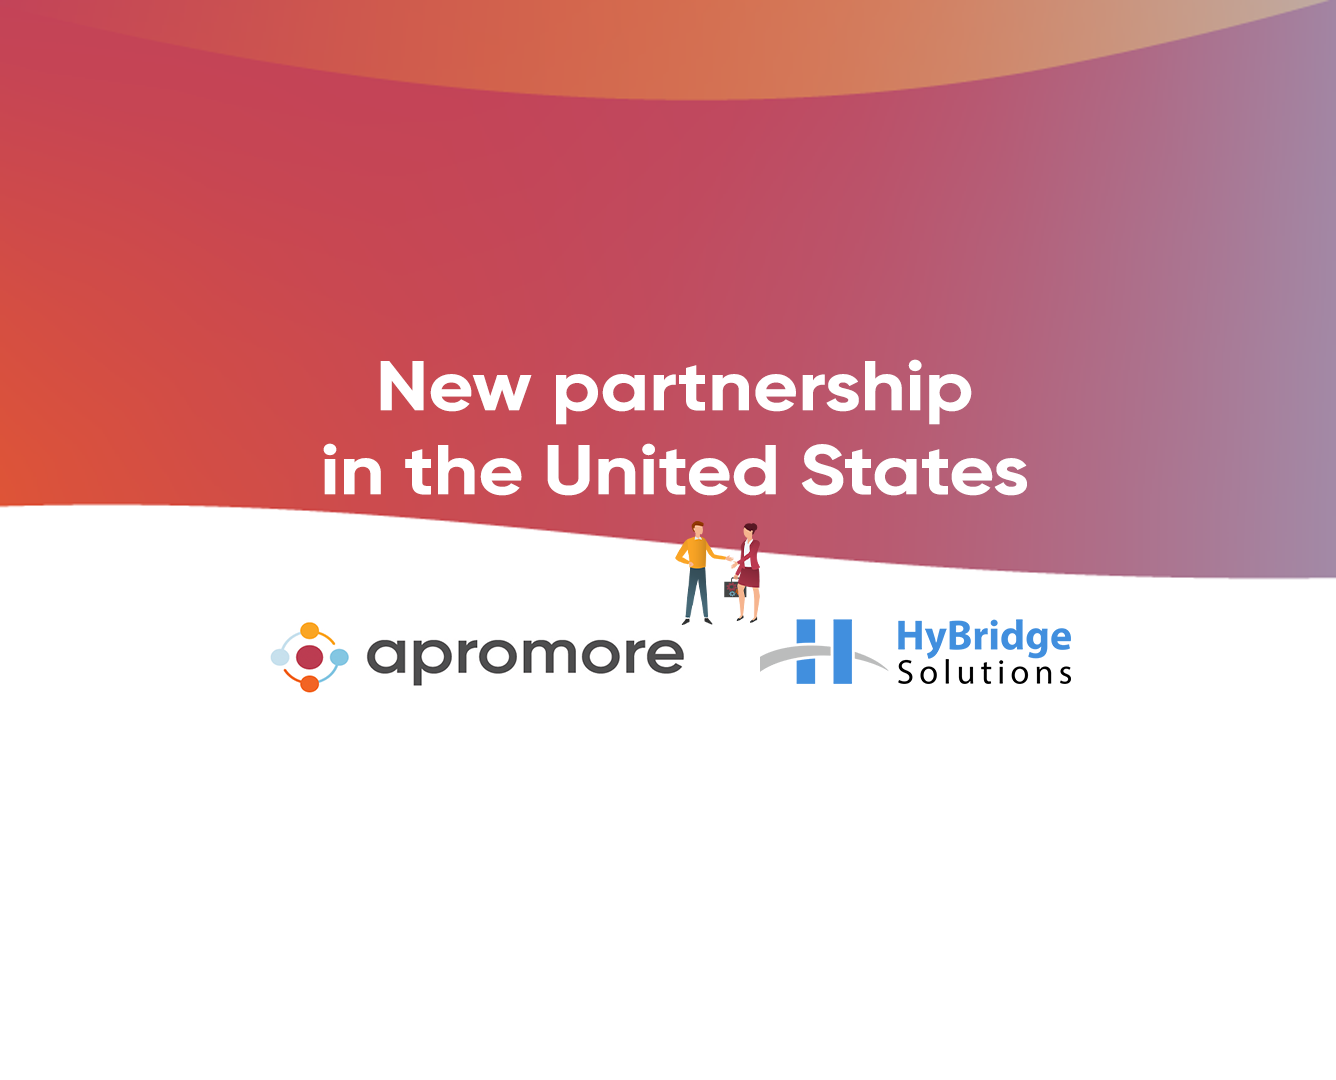 New Partnership in the U.S.